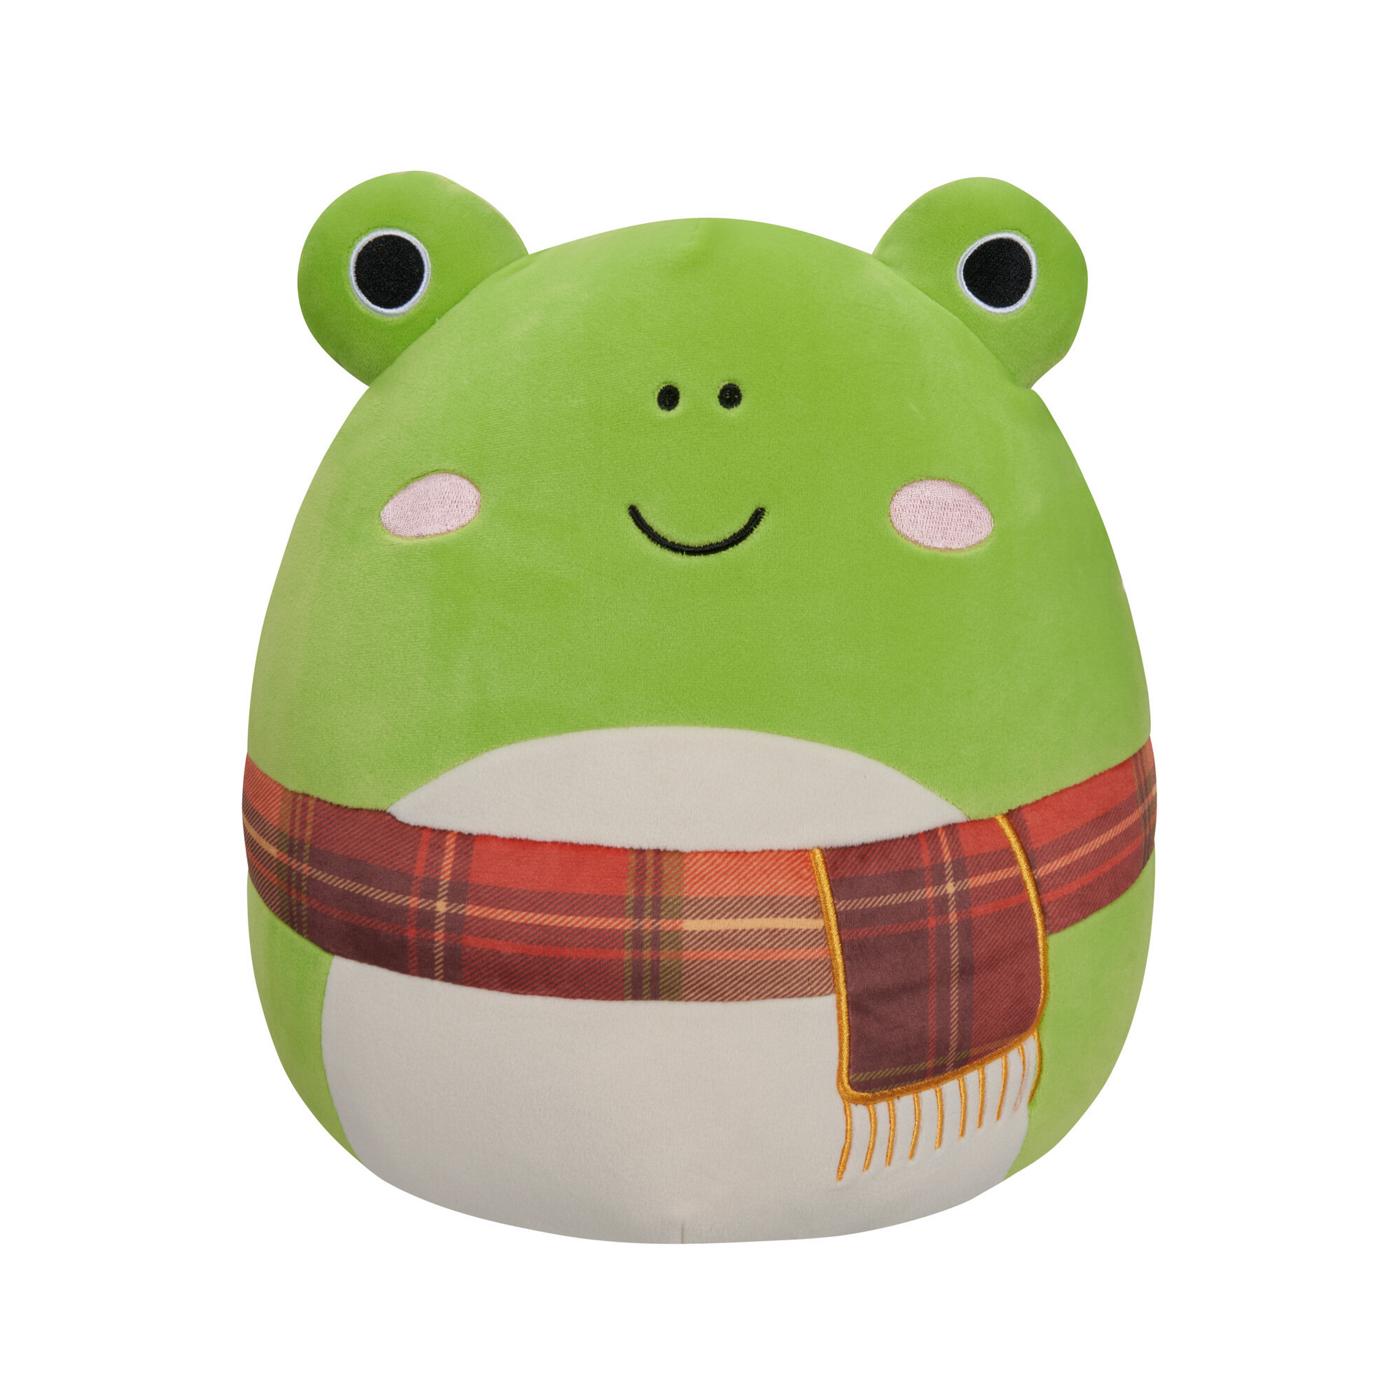 Squishmallows Frog Plush with Scarf - Green